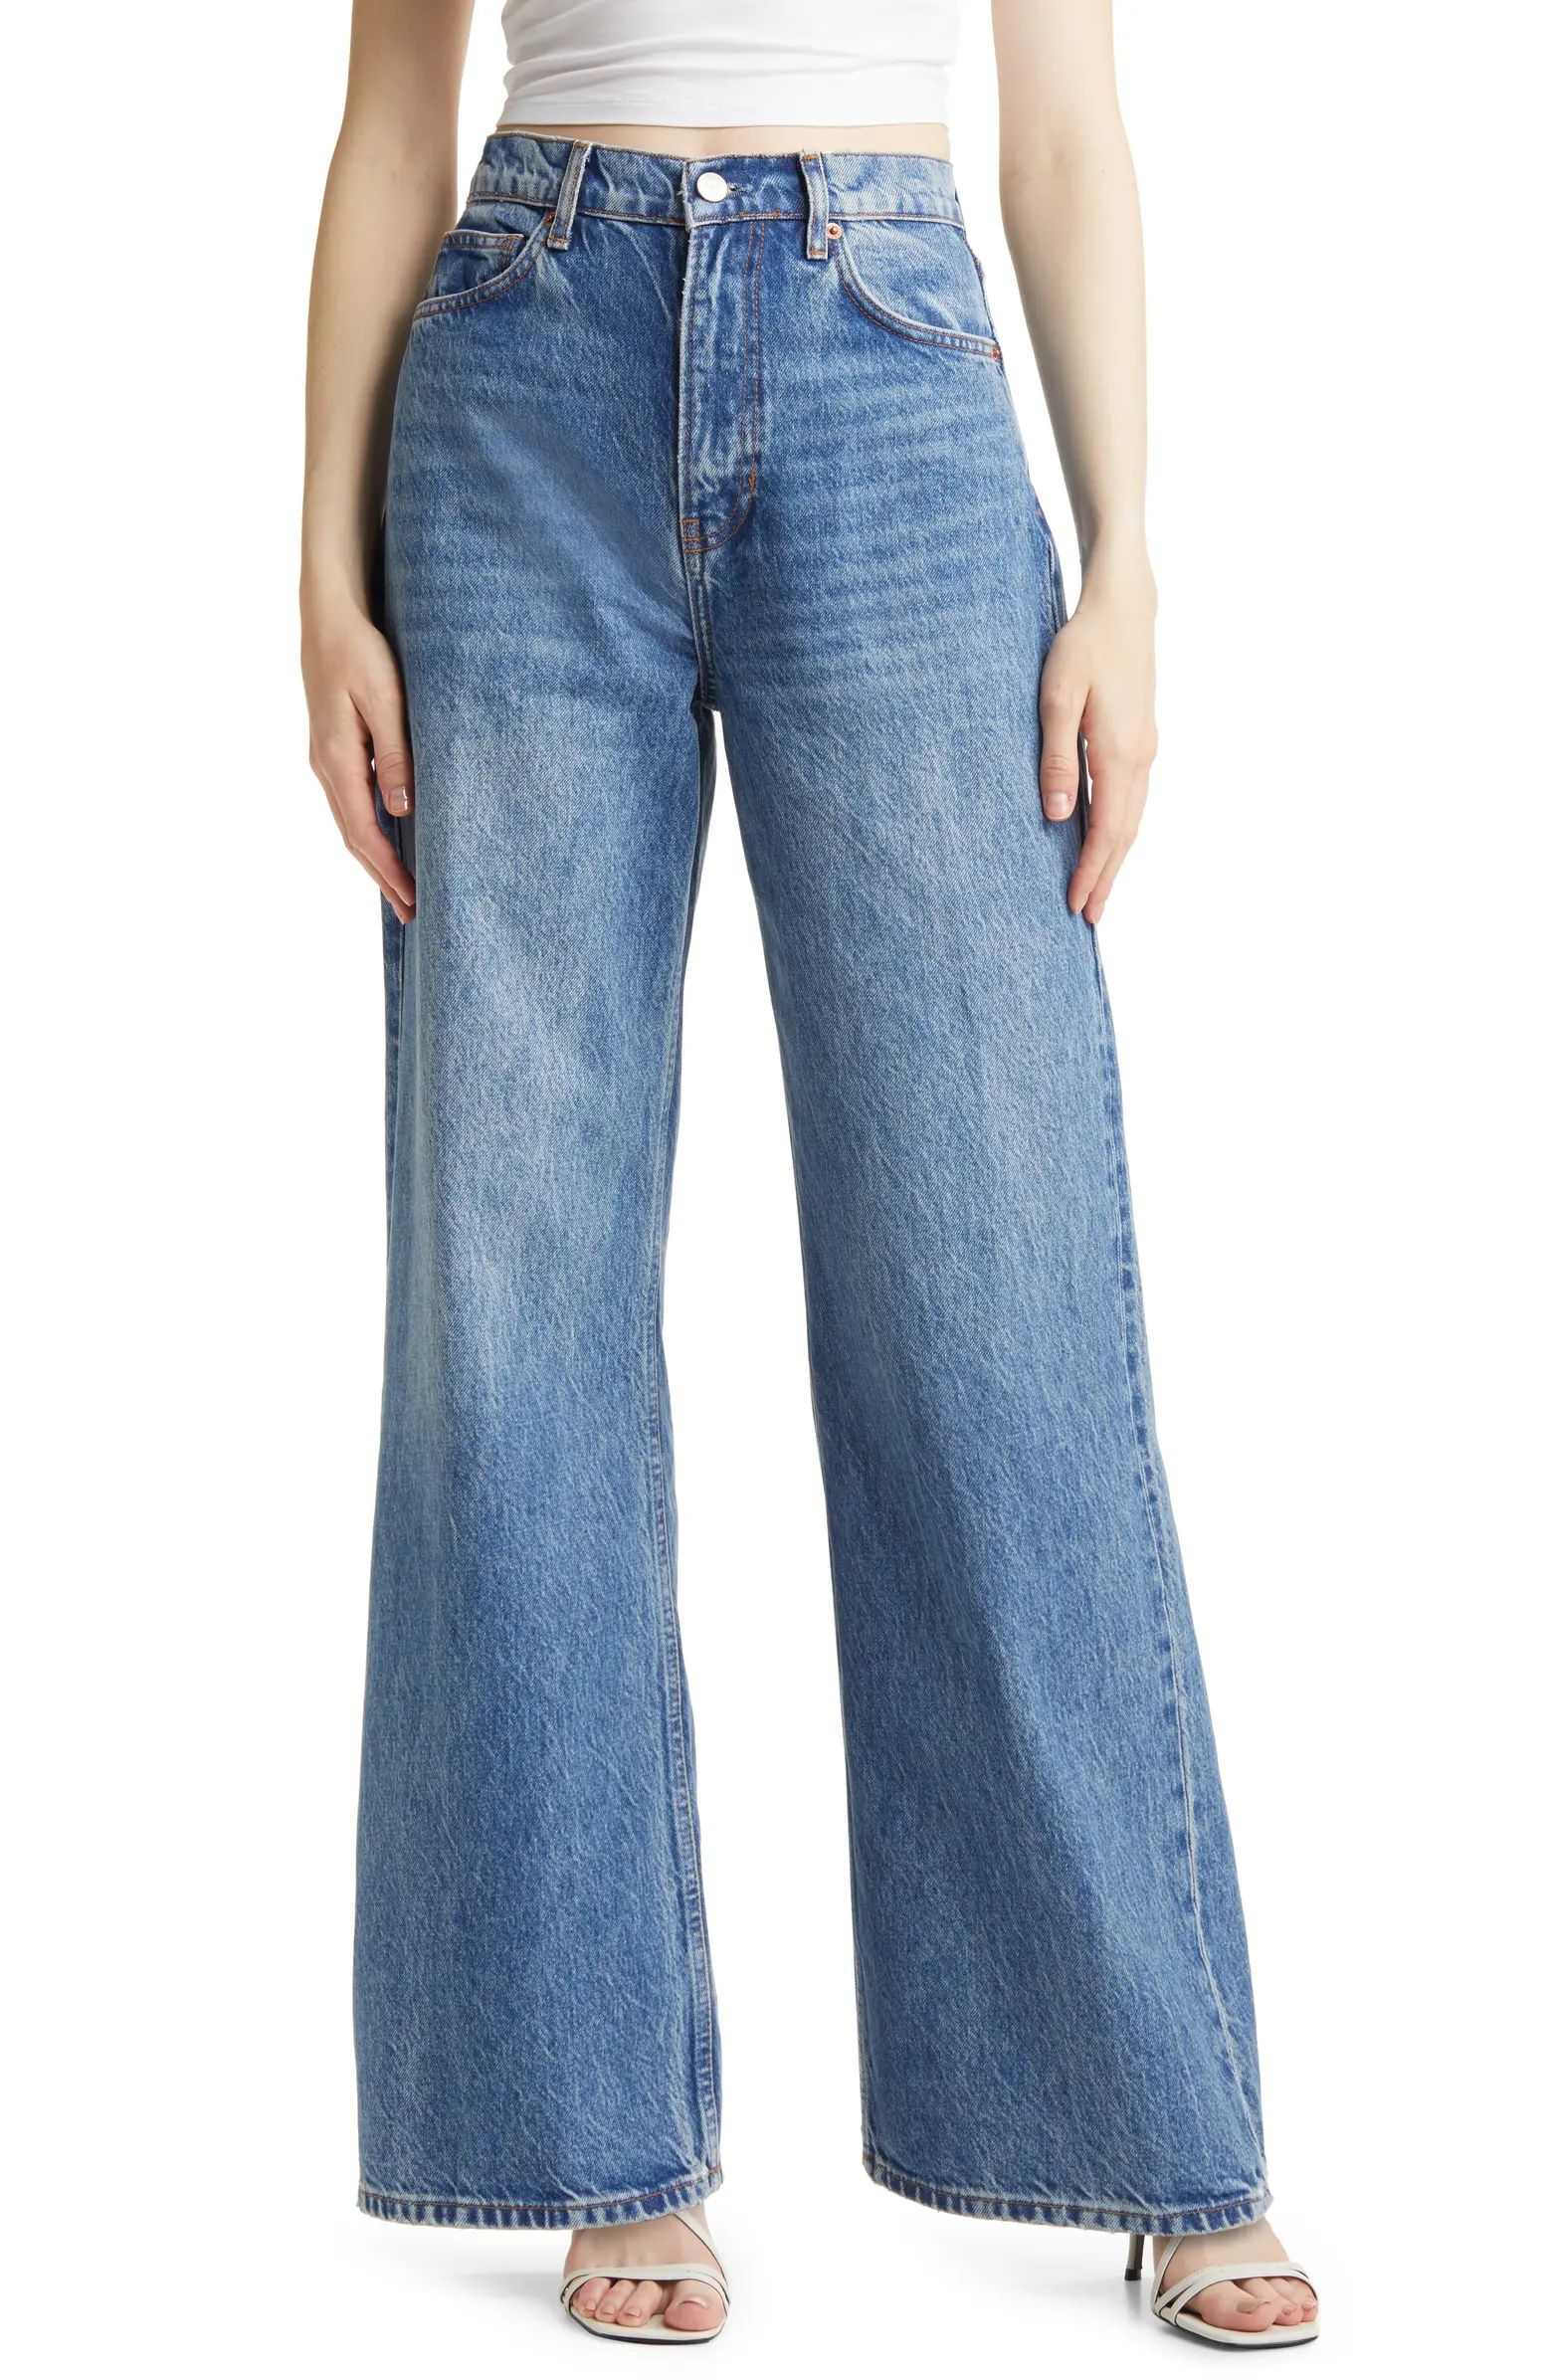 Reformation Cary High Waist Wide Leg Jeans | Nordstrom | Nordstrom